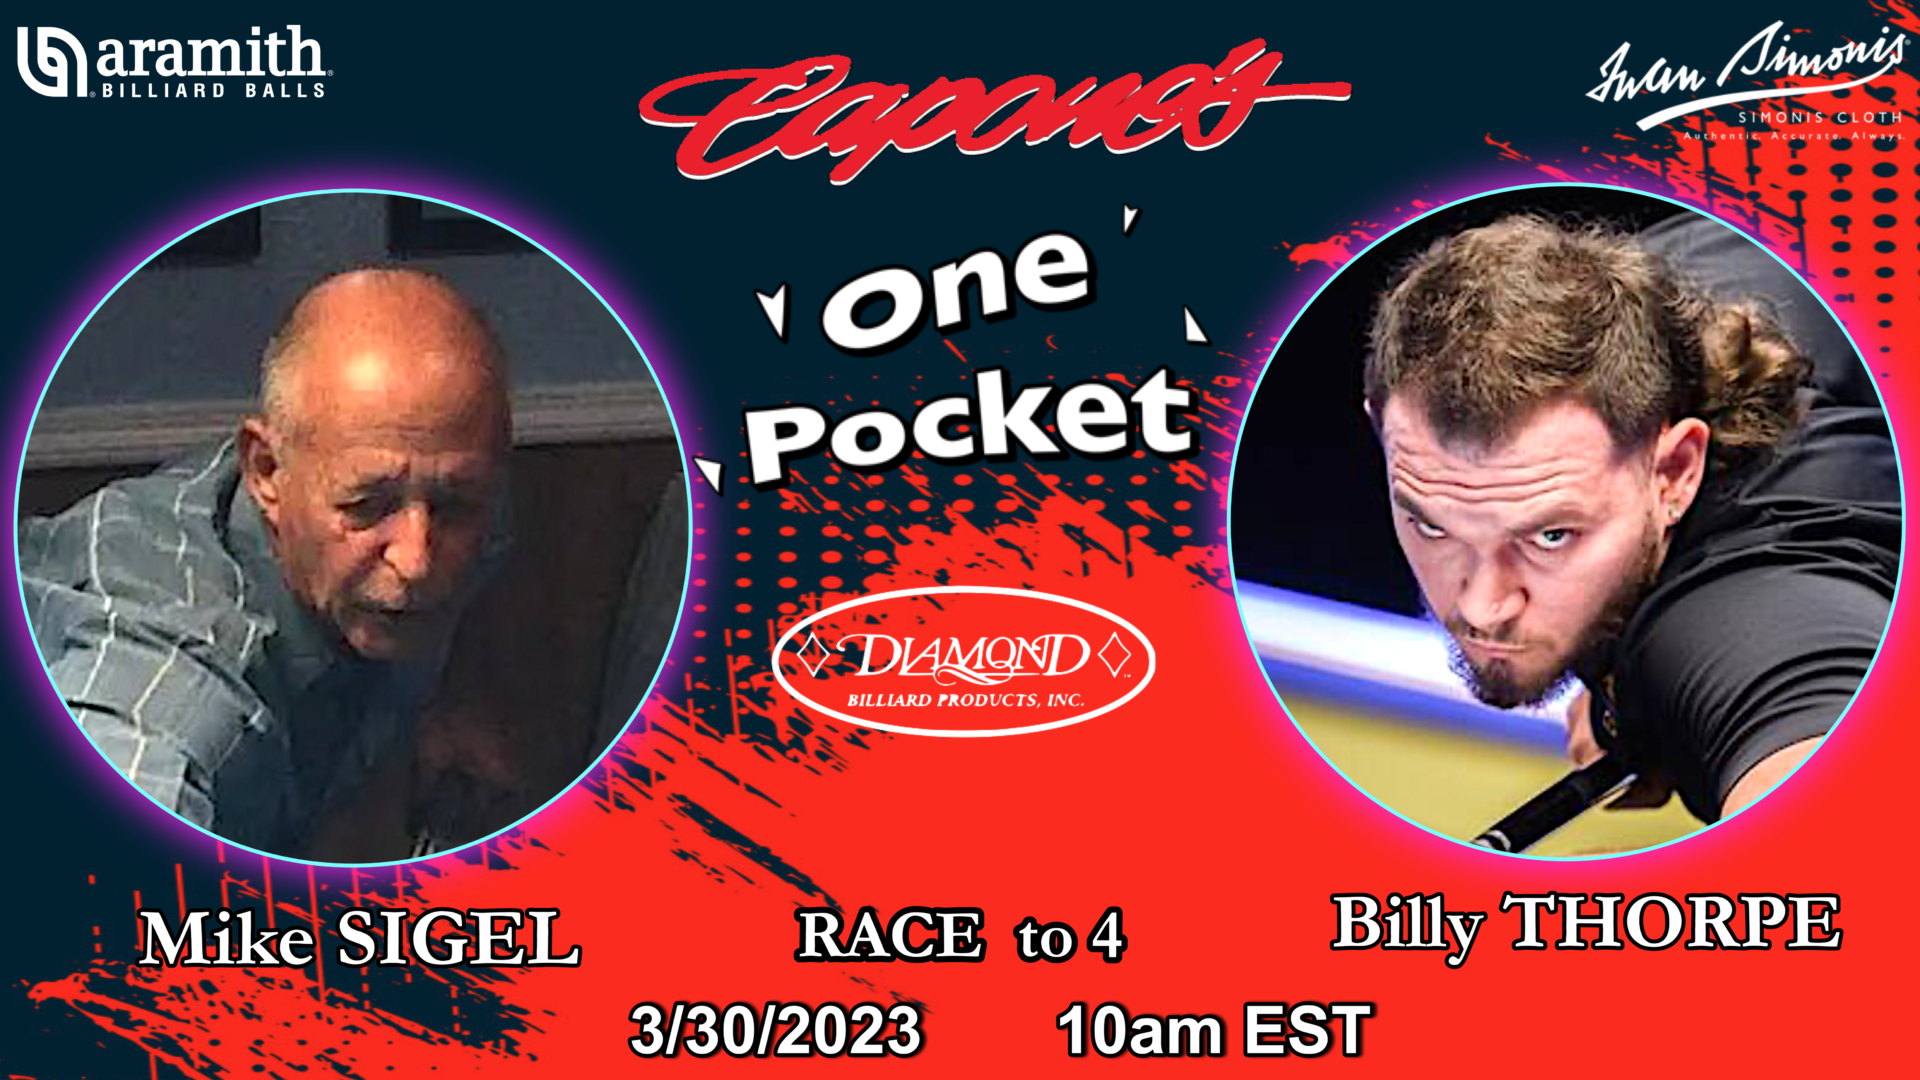 Billy Thorpe vs Mike Sigel OnePocket from Table 3 Match 20 AZBtv